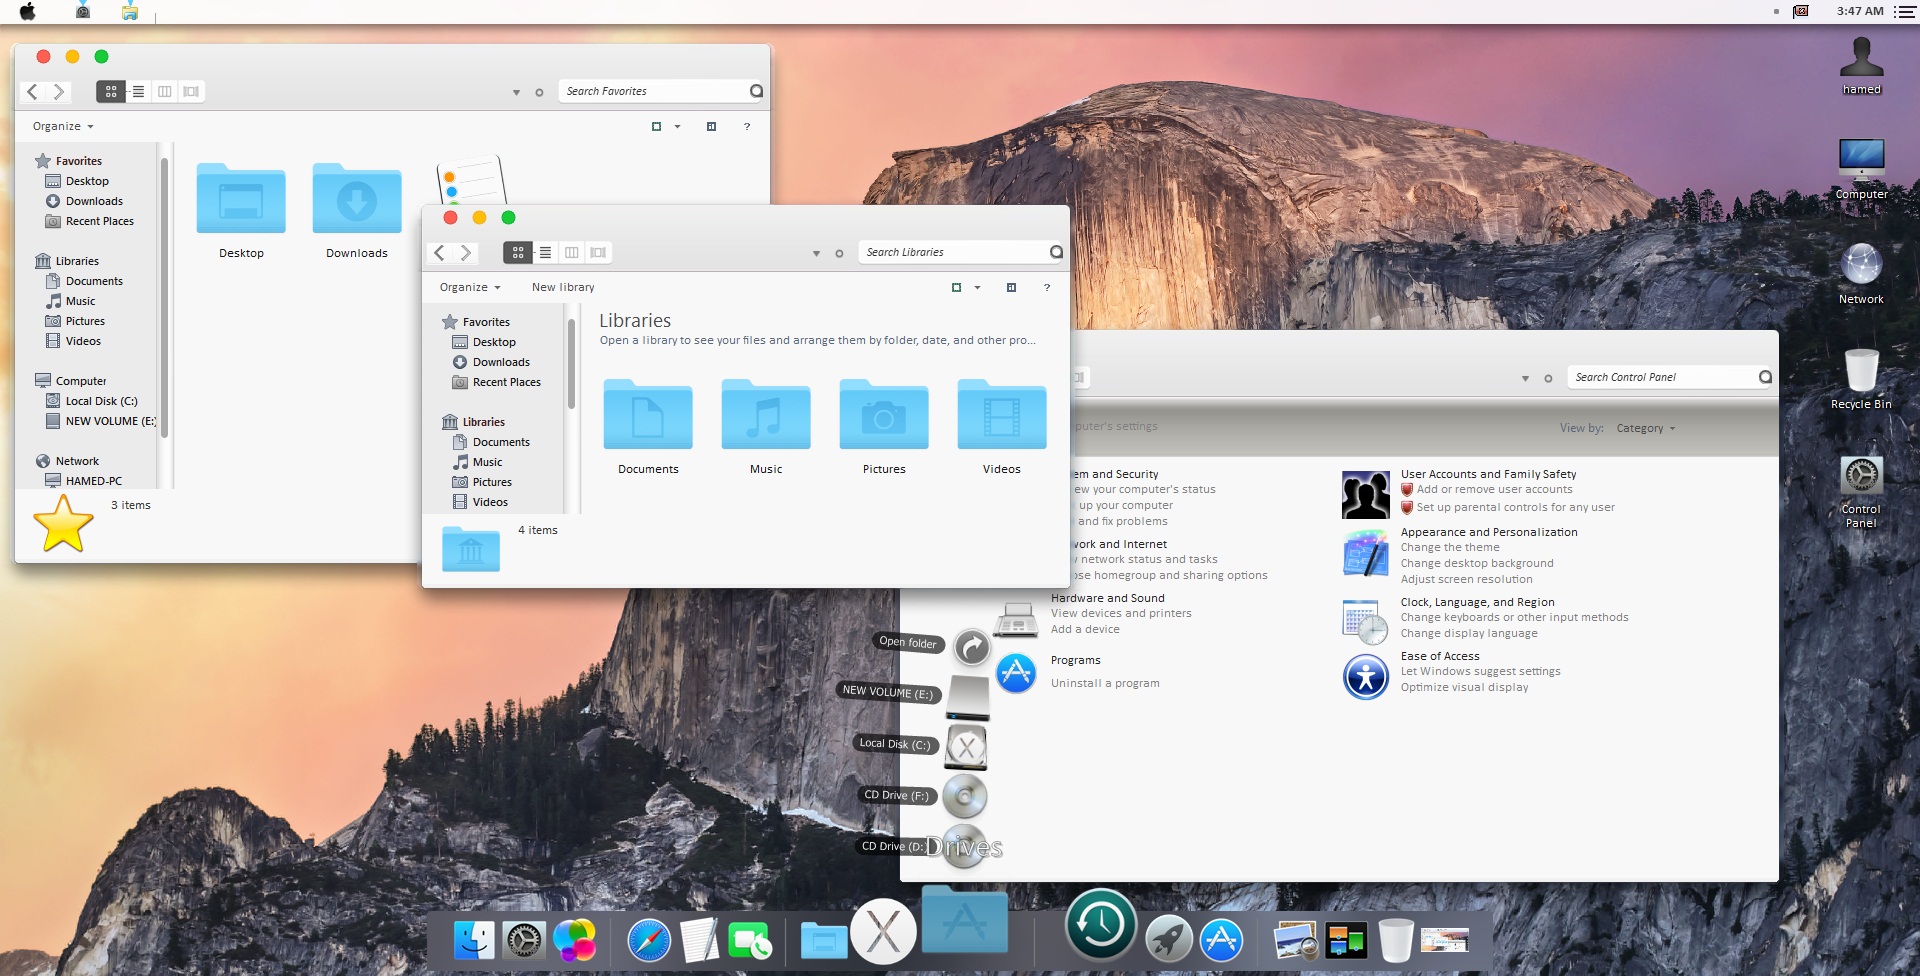 iOS8 SkinPack for Win7/8/8.1 released